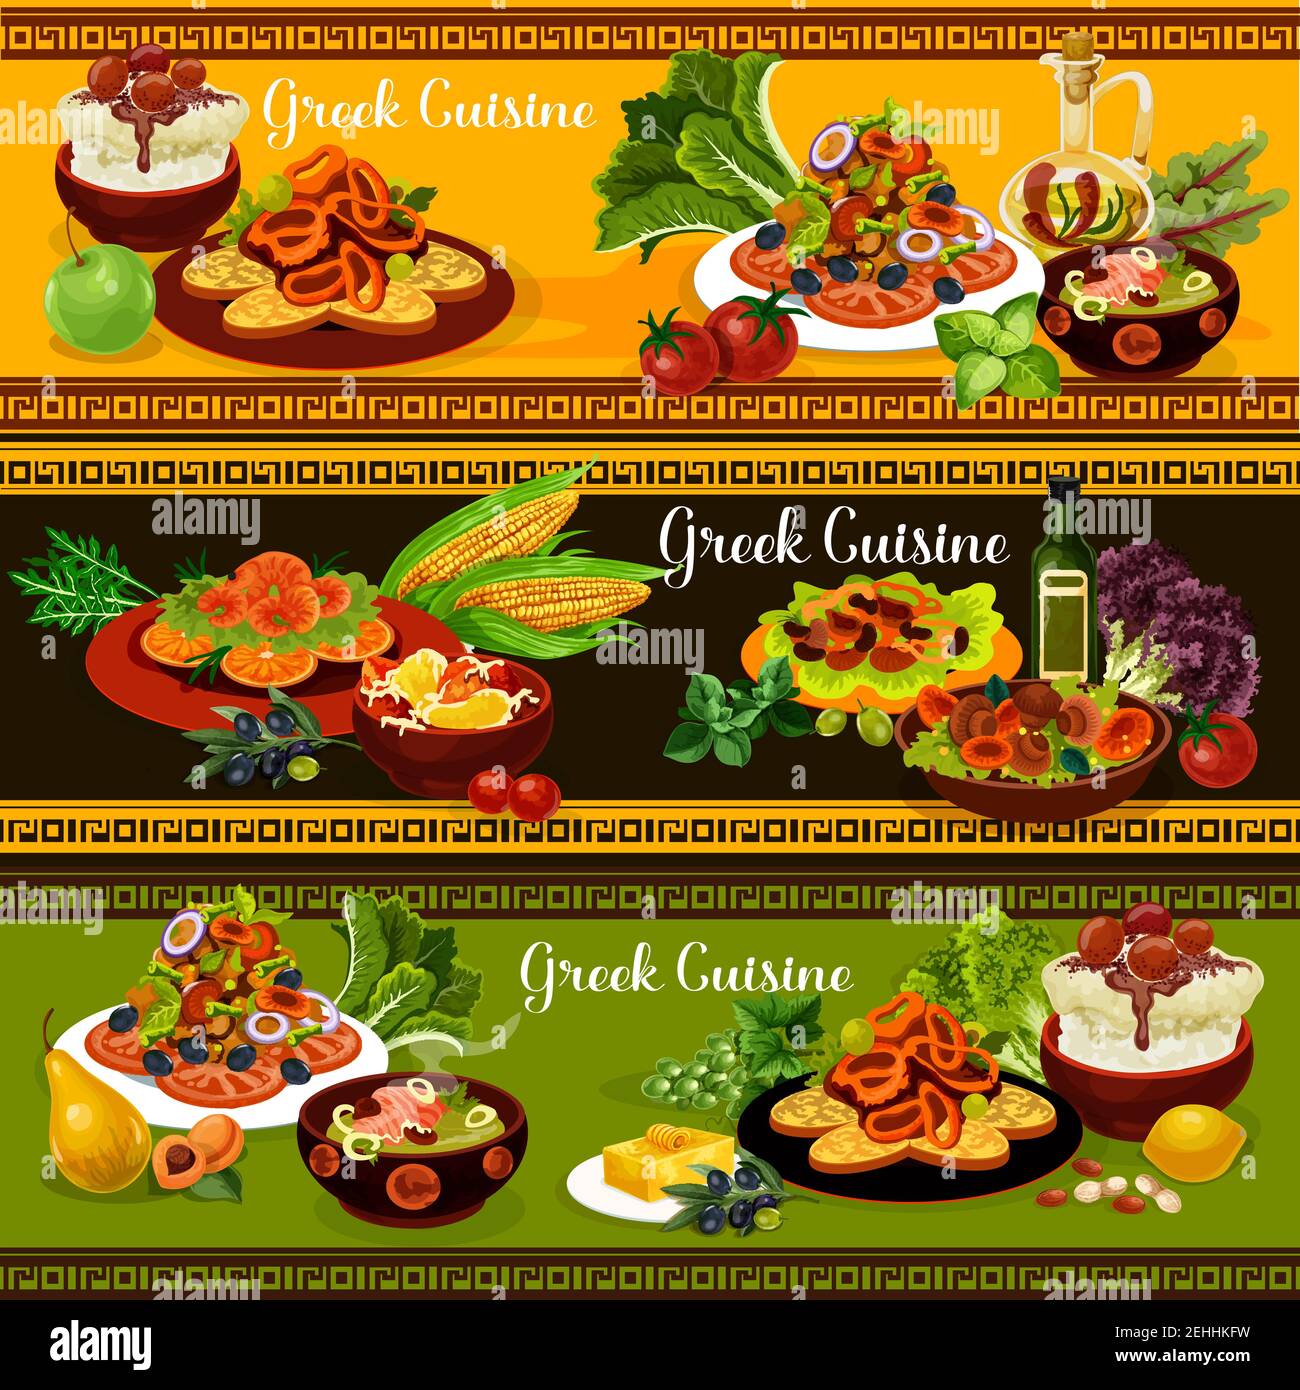 Greek cuisine traditional food banners of mediterranean dish. Vegetable and feta cheese salad, grilled seafood and squid in wine sauce, cream fish sou Stock Vector